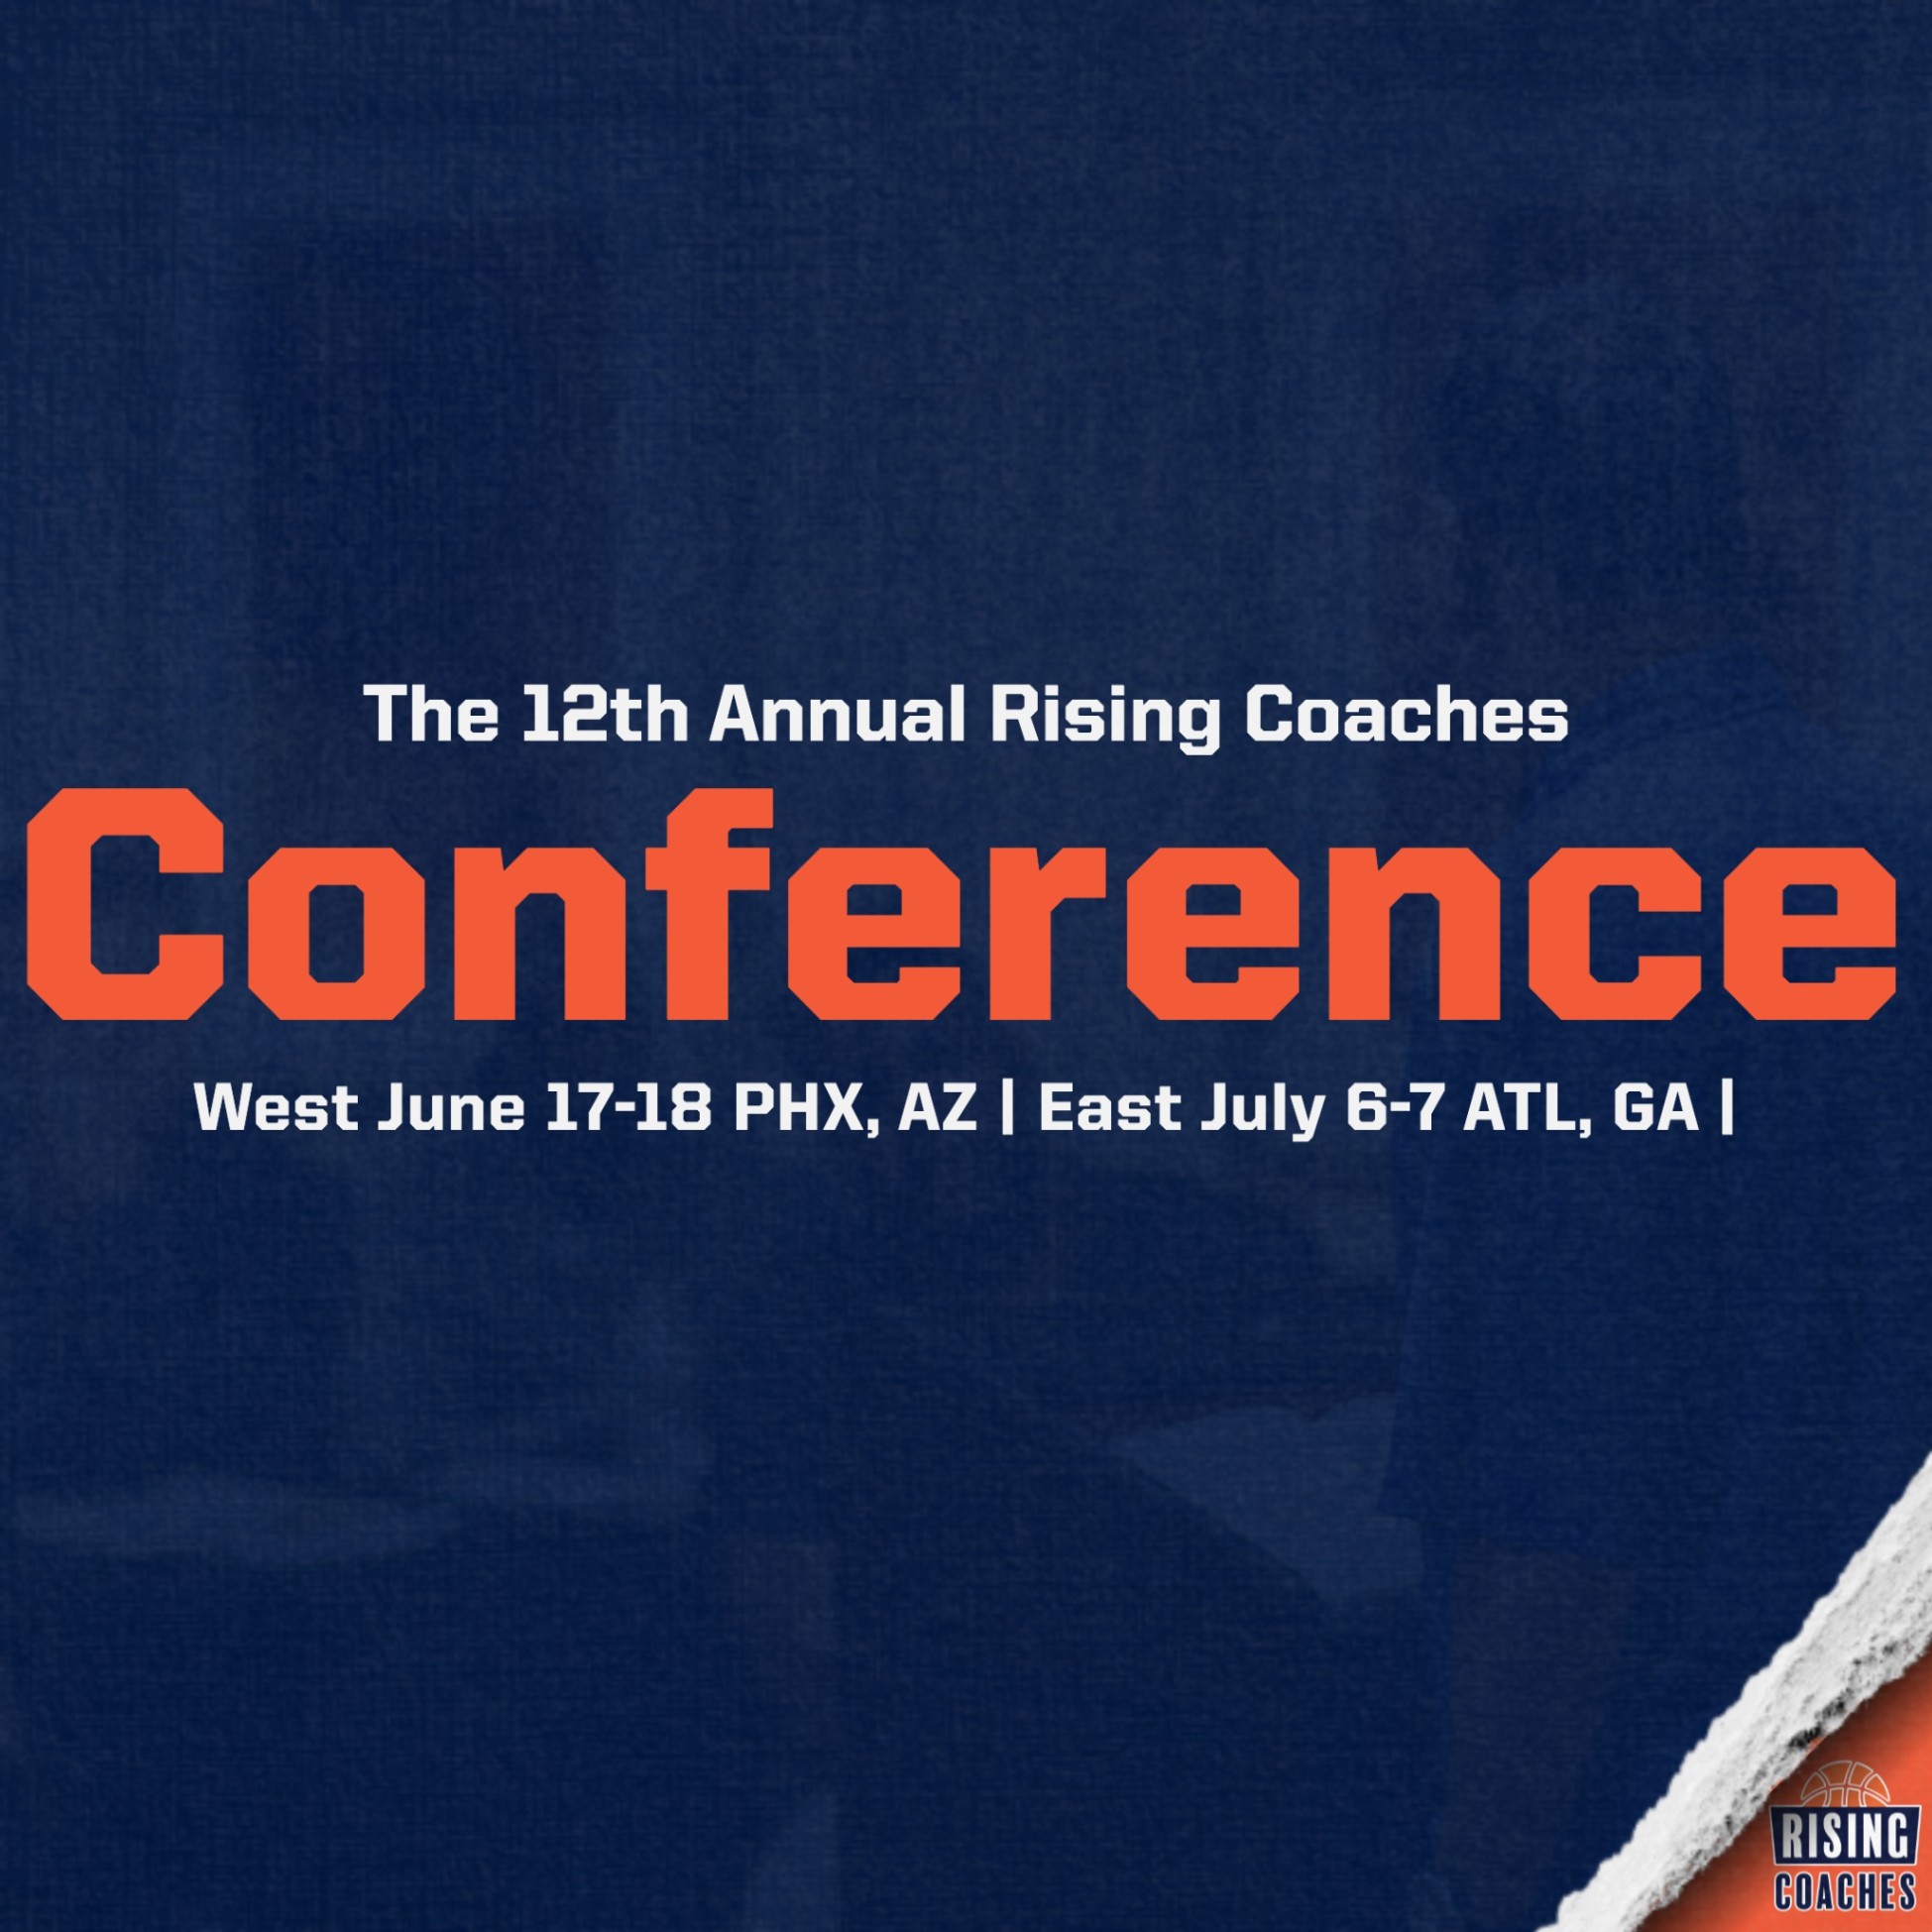 Rising Coaches Announces Dates and Locations for 2021 Summer Events